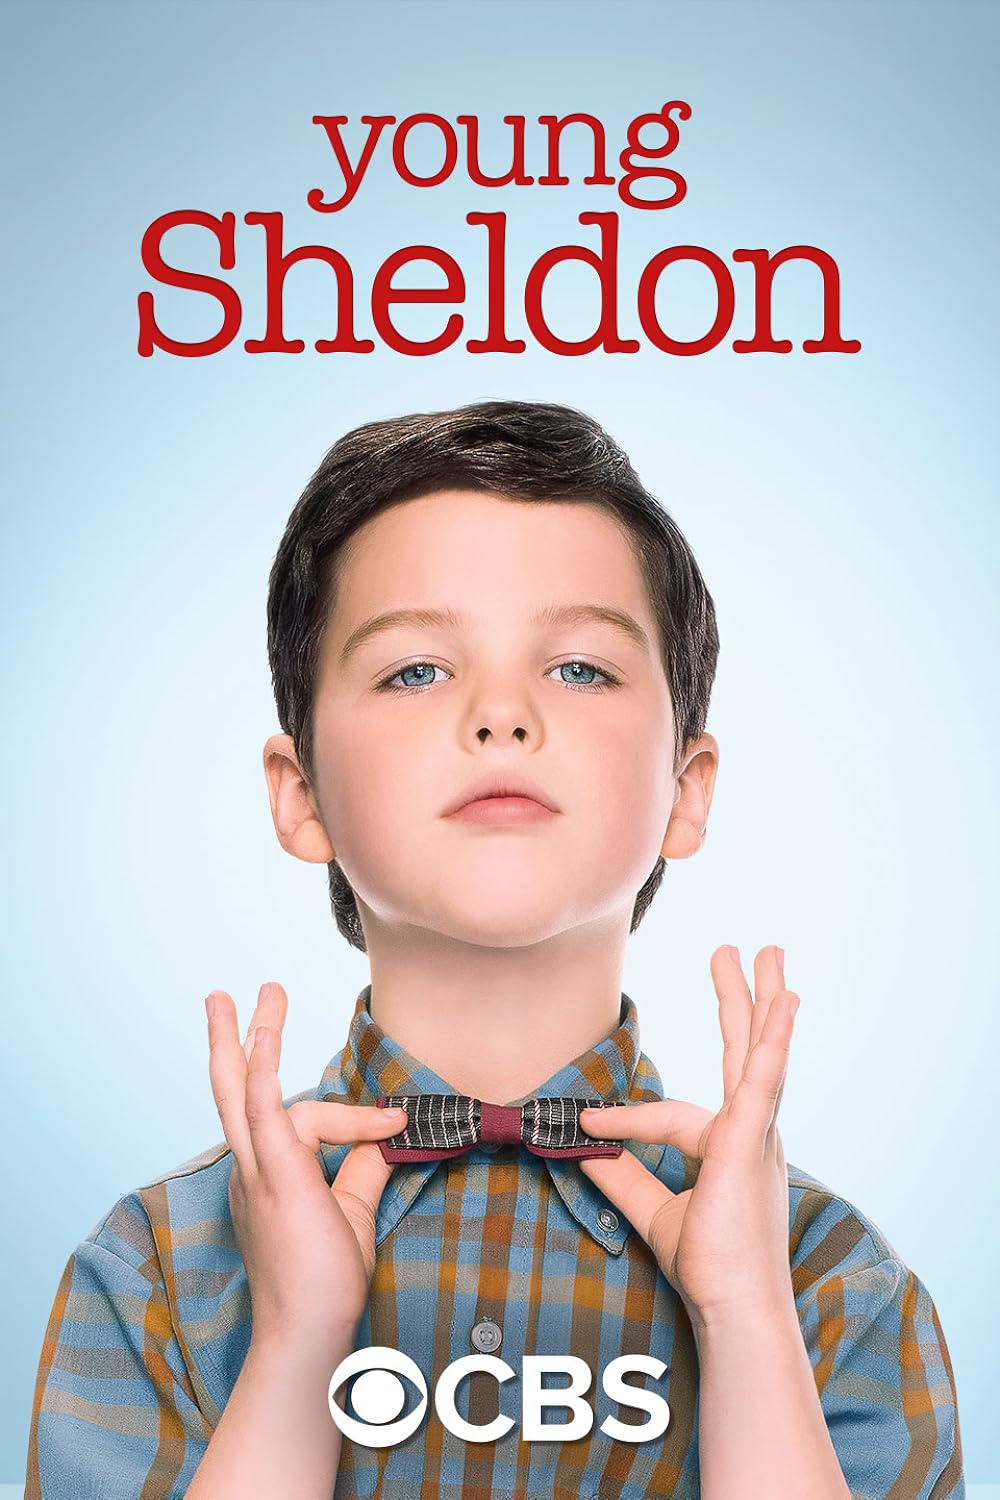 You Are Currently Viewing Young Sheldon S07 (Episode 9 Added) | Tv Series